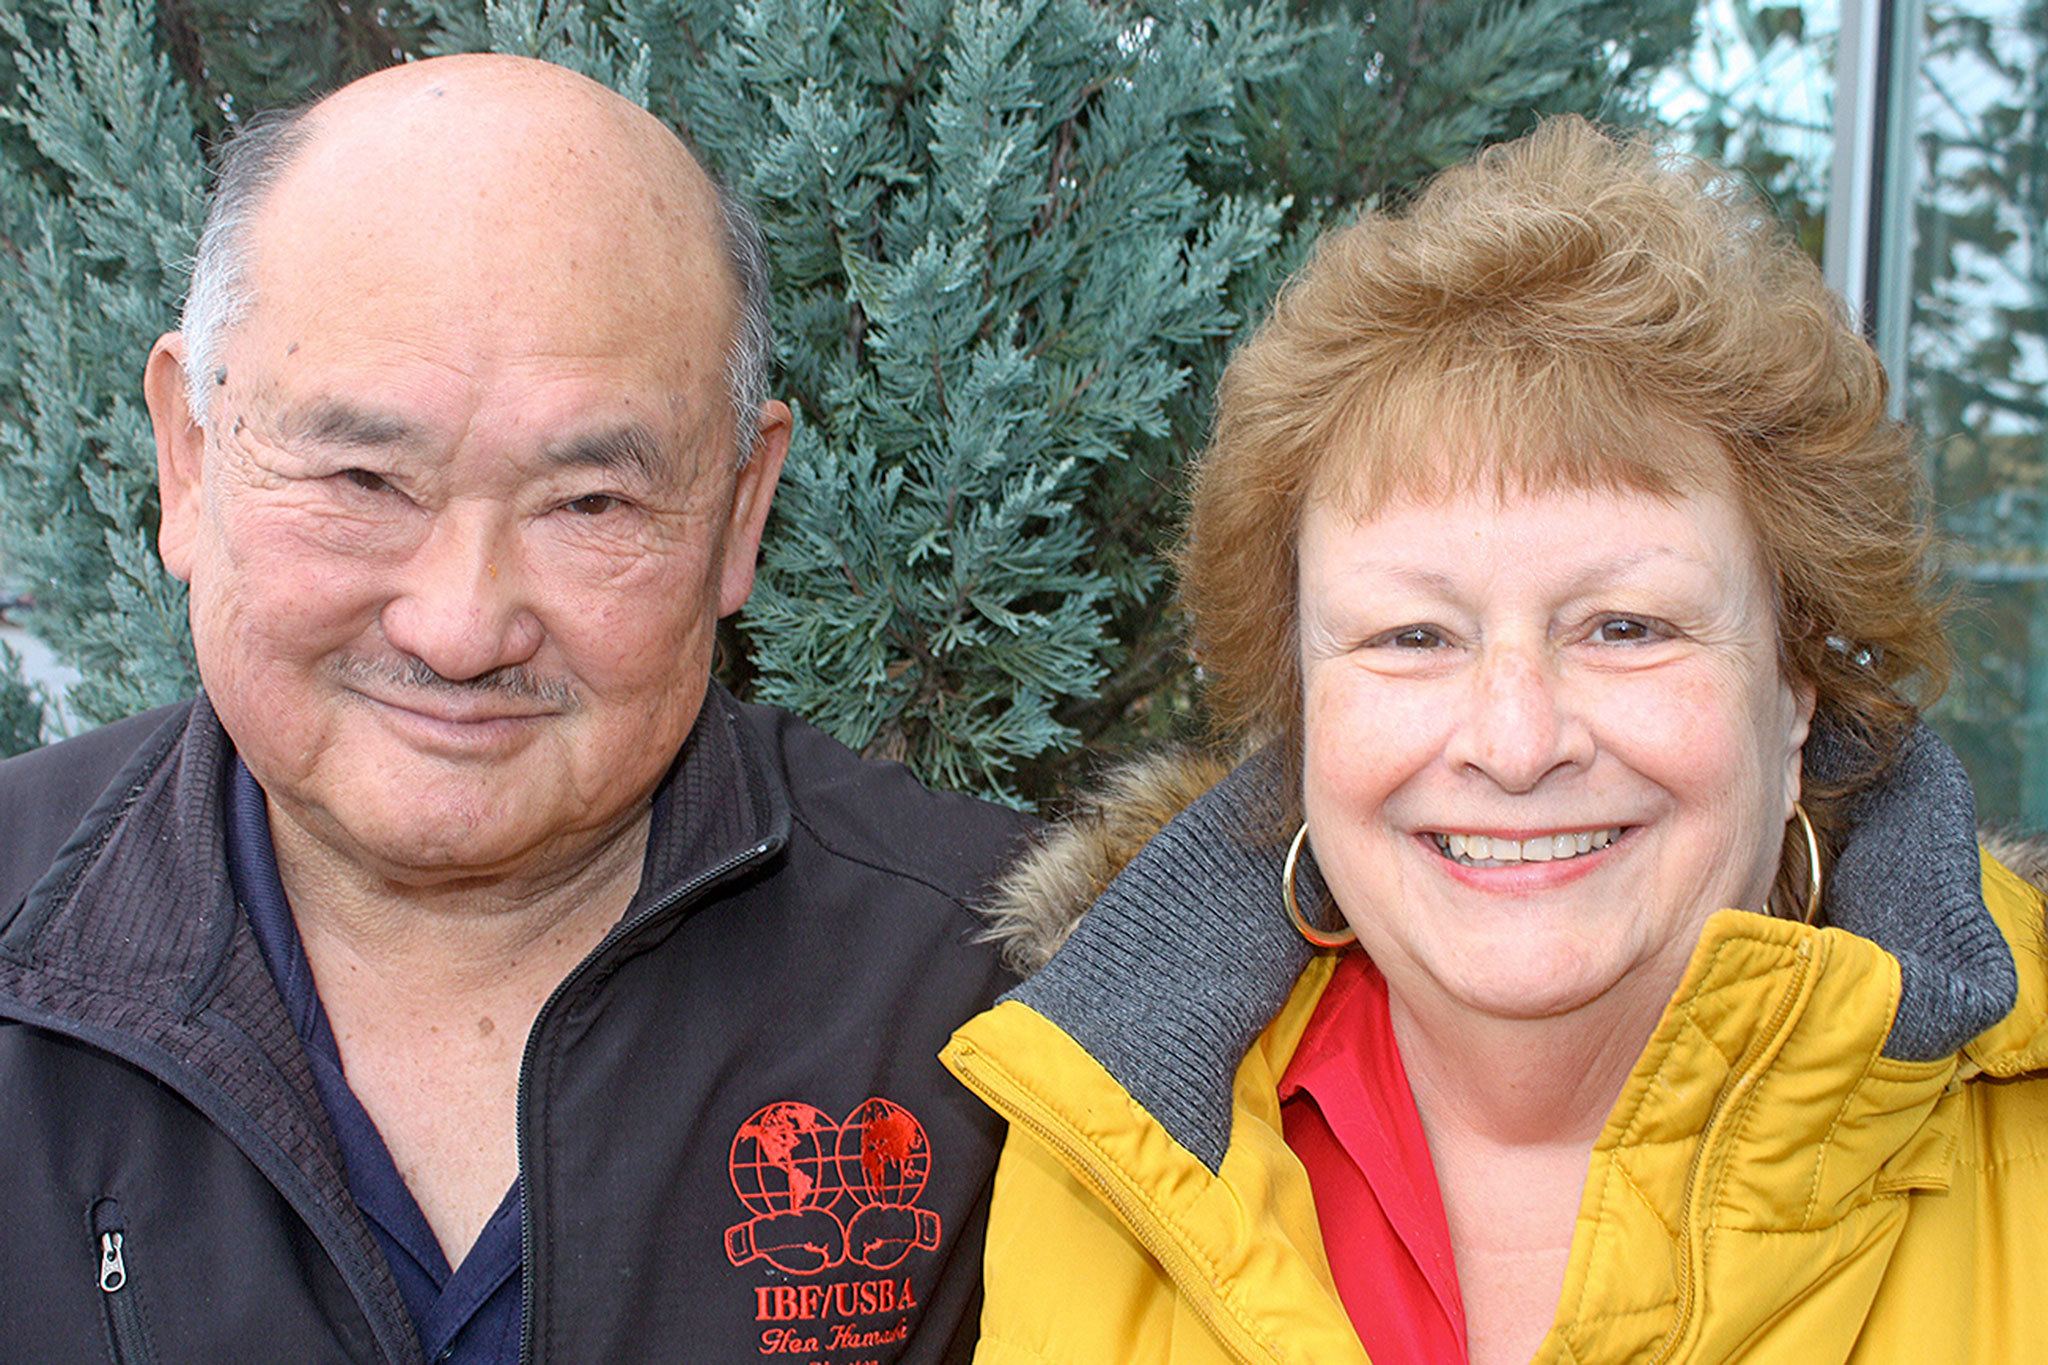 Power couple: Glen and Leslie Hamada help keep kids off the streets and active through the Kent East Hill Boxing Club, which they established five years ago with grants and donations. MARK KLAAS, Kent Reporter